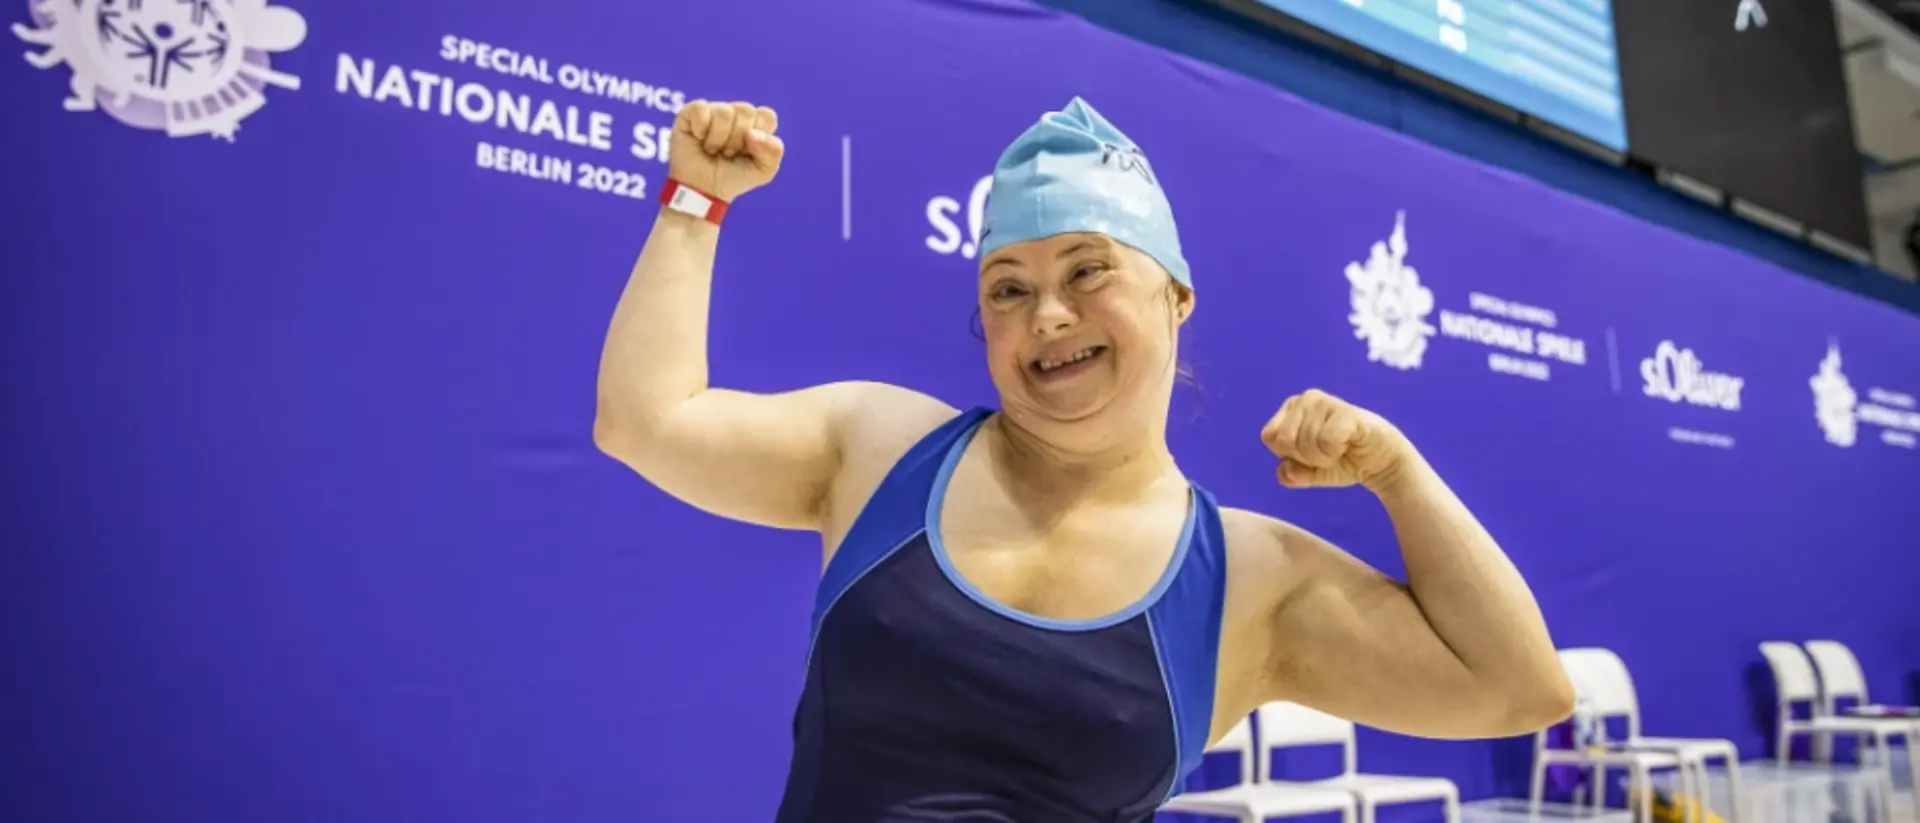 A swimmer taking part in the Special Olympics looks into the camera, smiling and cheering.